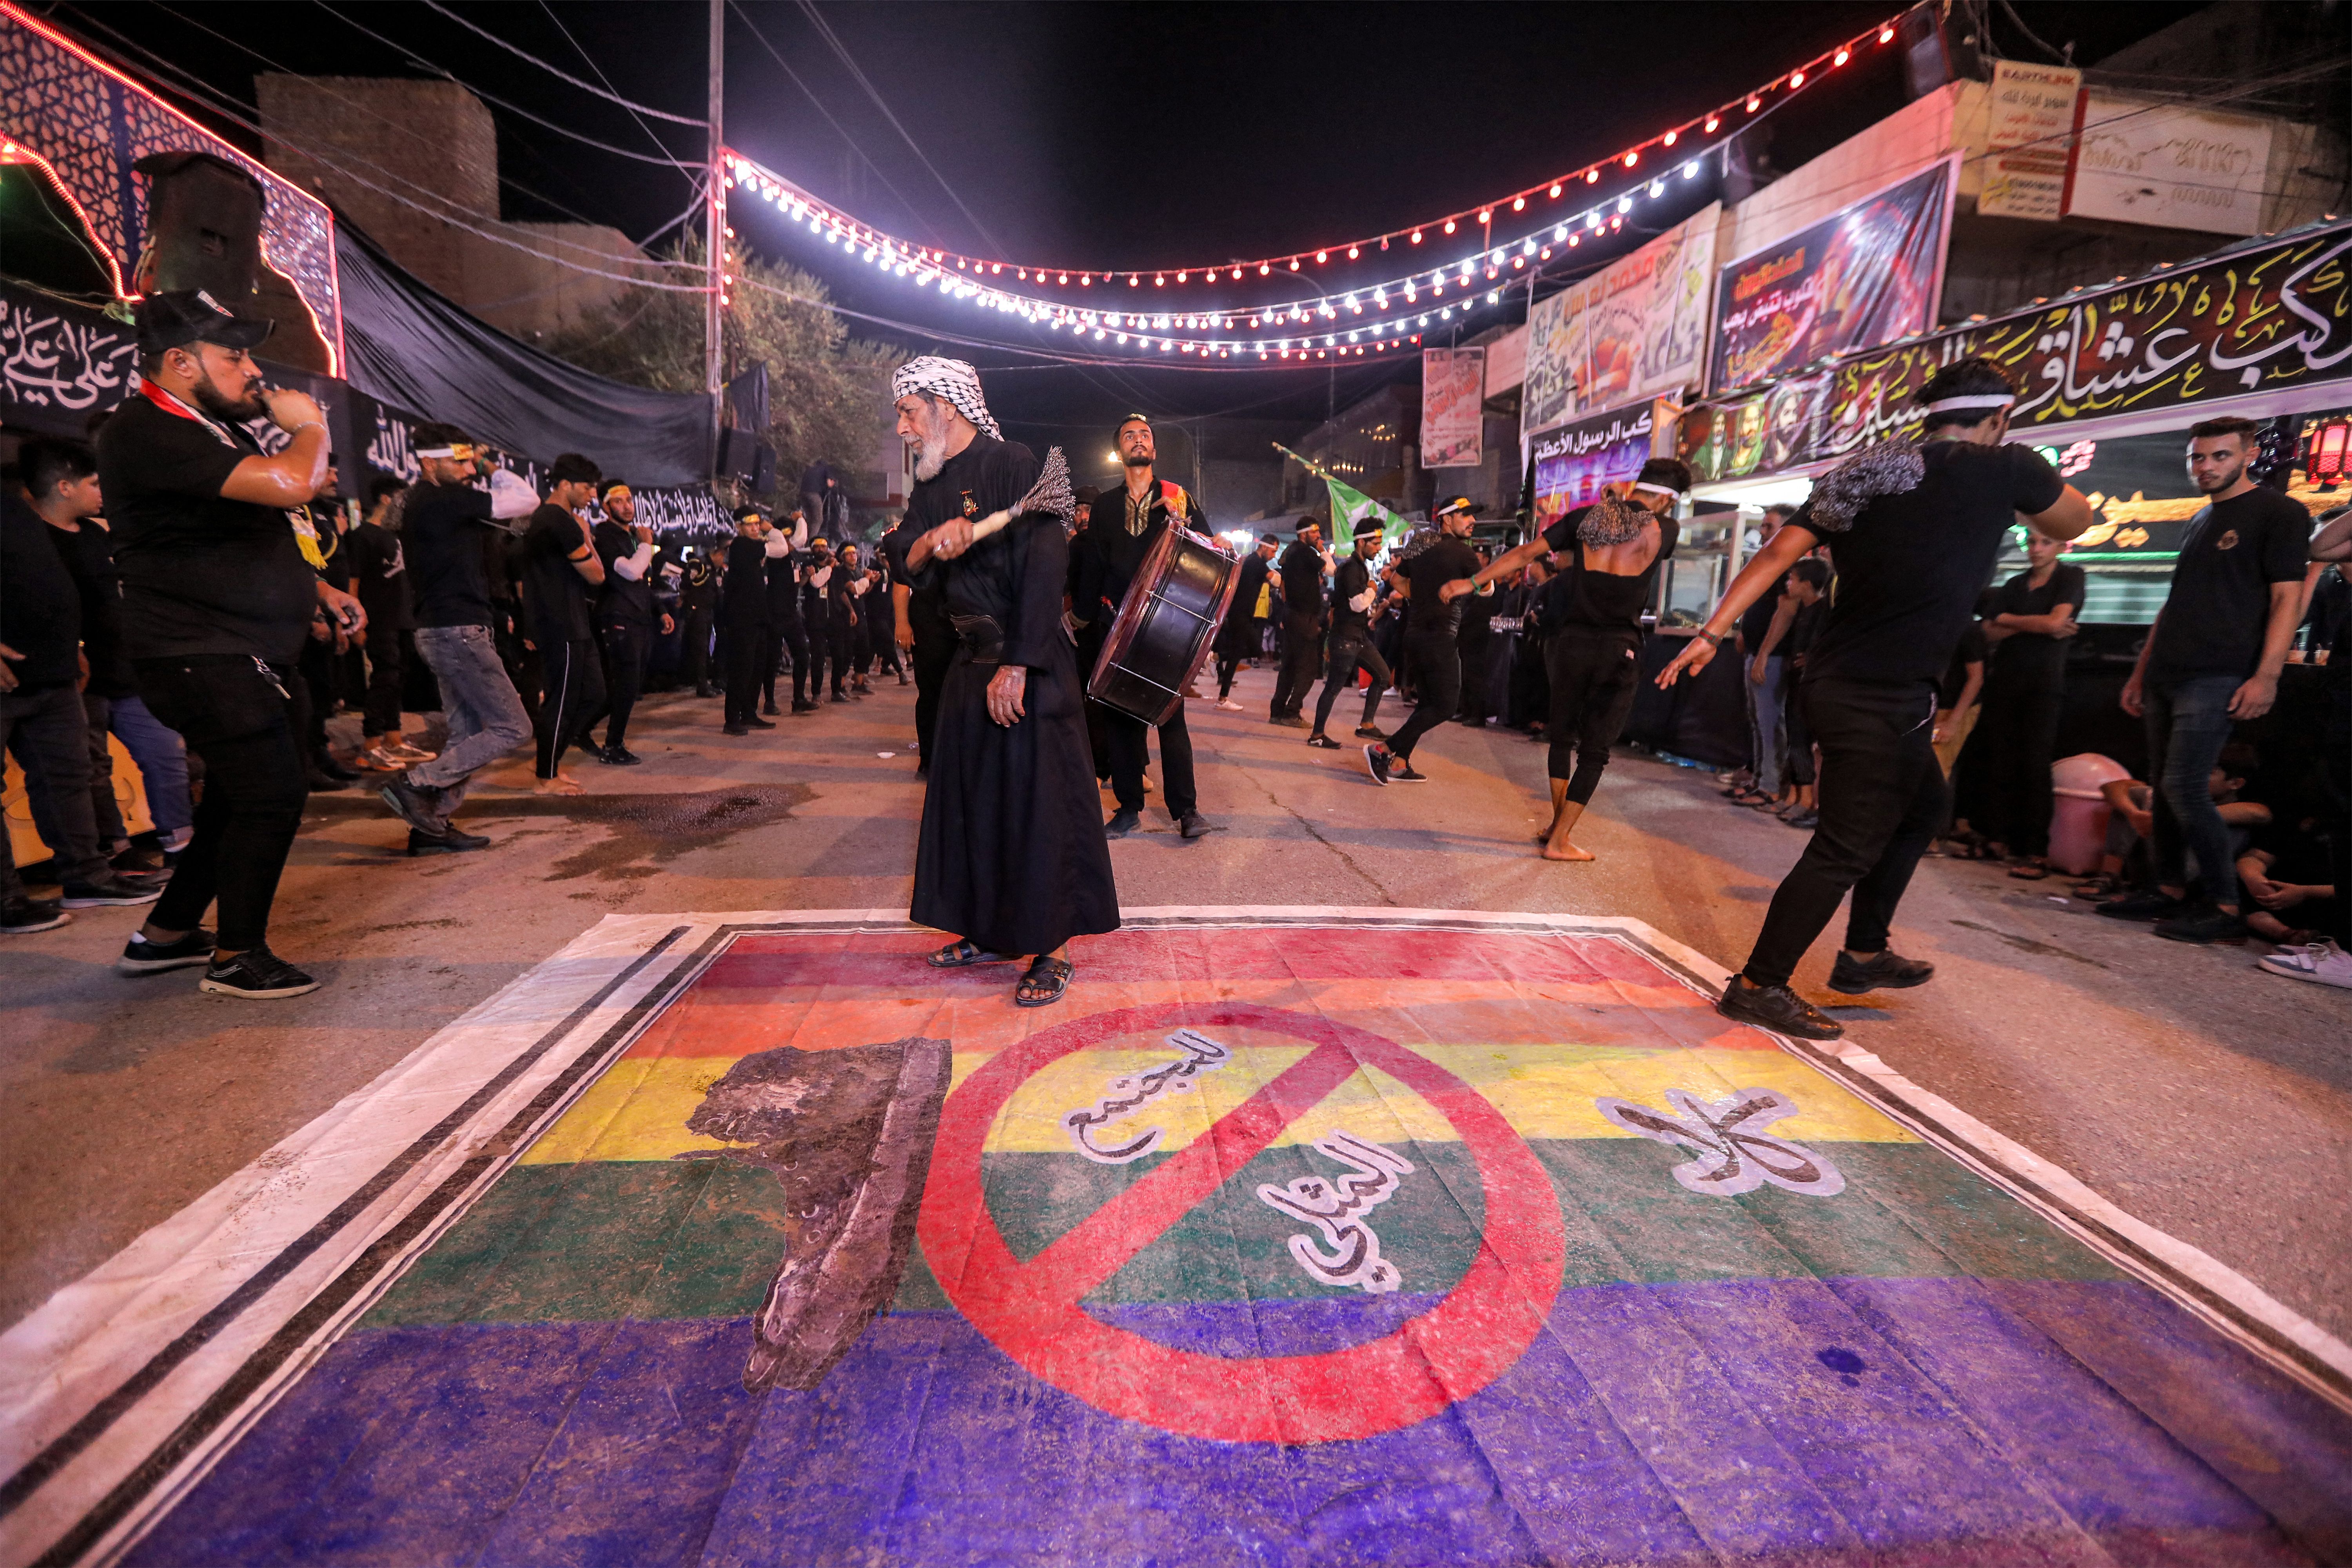 Shia Muslim devotees self-flagellate over an unfurled banner on the ground depicting the Pride rainbow flag defaced with a boot and the Arabic slogan ‘no to homosexual society’ in the city of Nasiriyah in Iraq